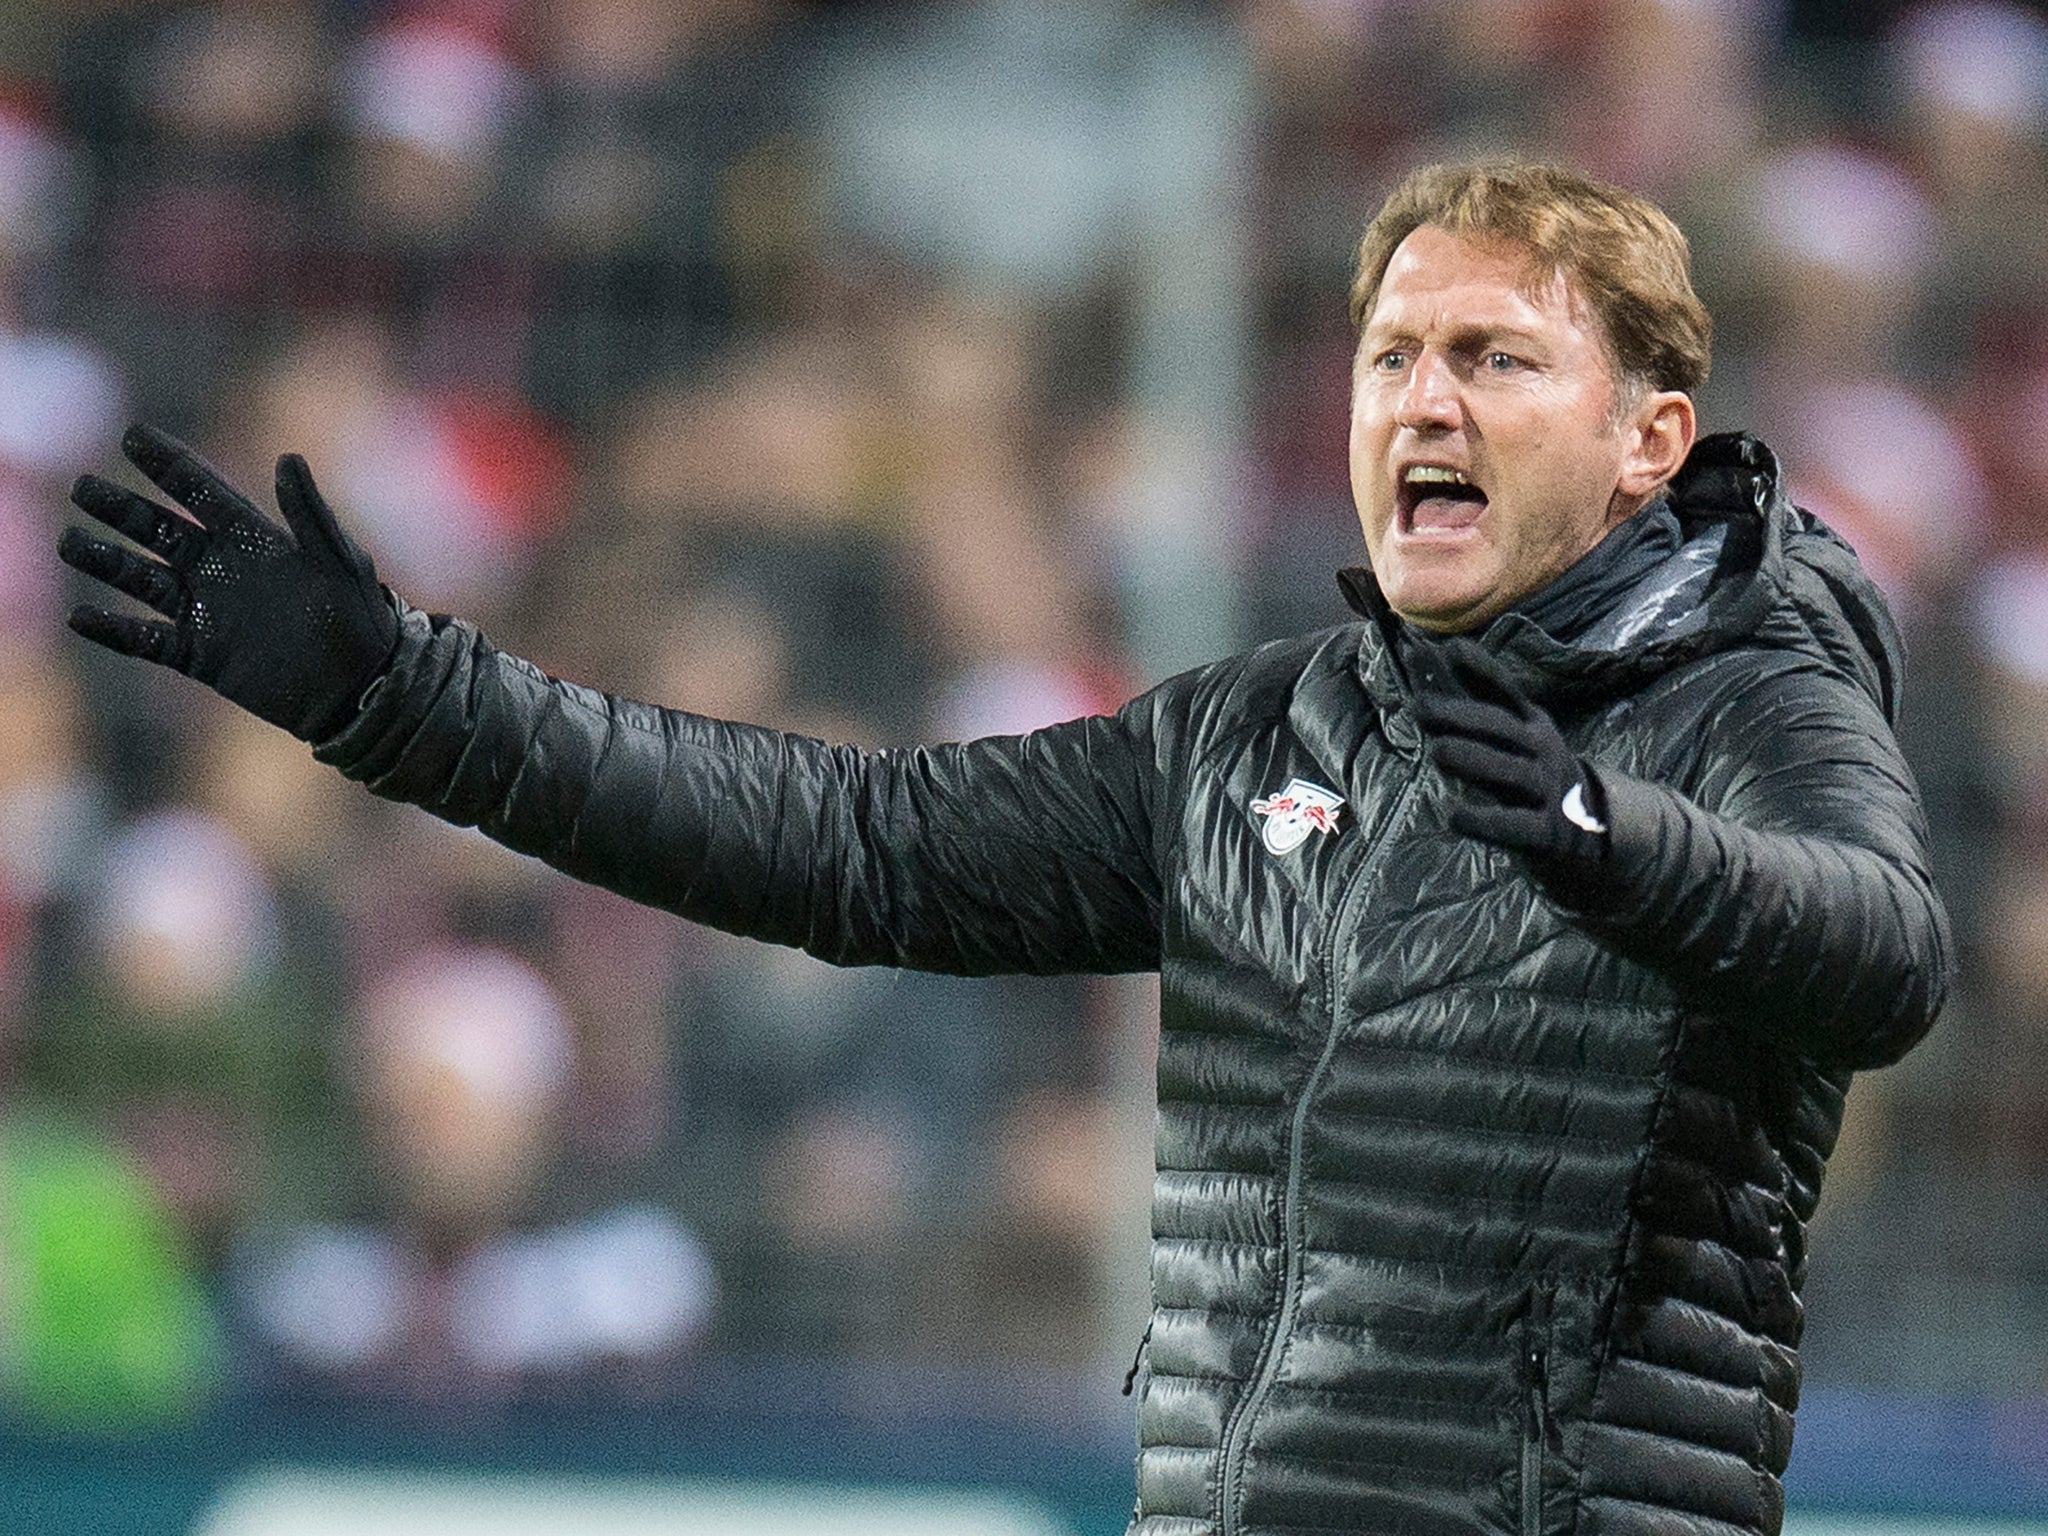 Hasenhuttl has guided his unbeaten Leipzig side to the top of the Bundesliga